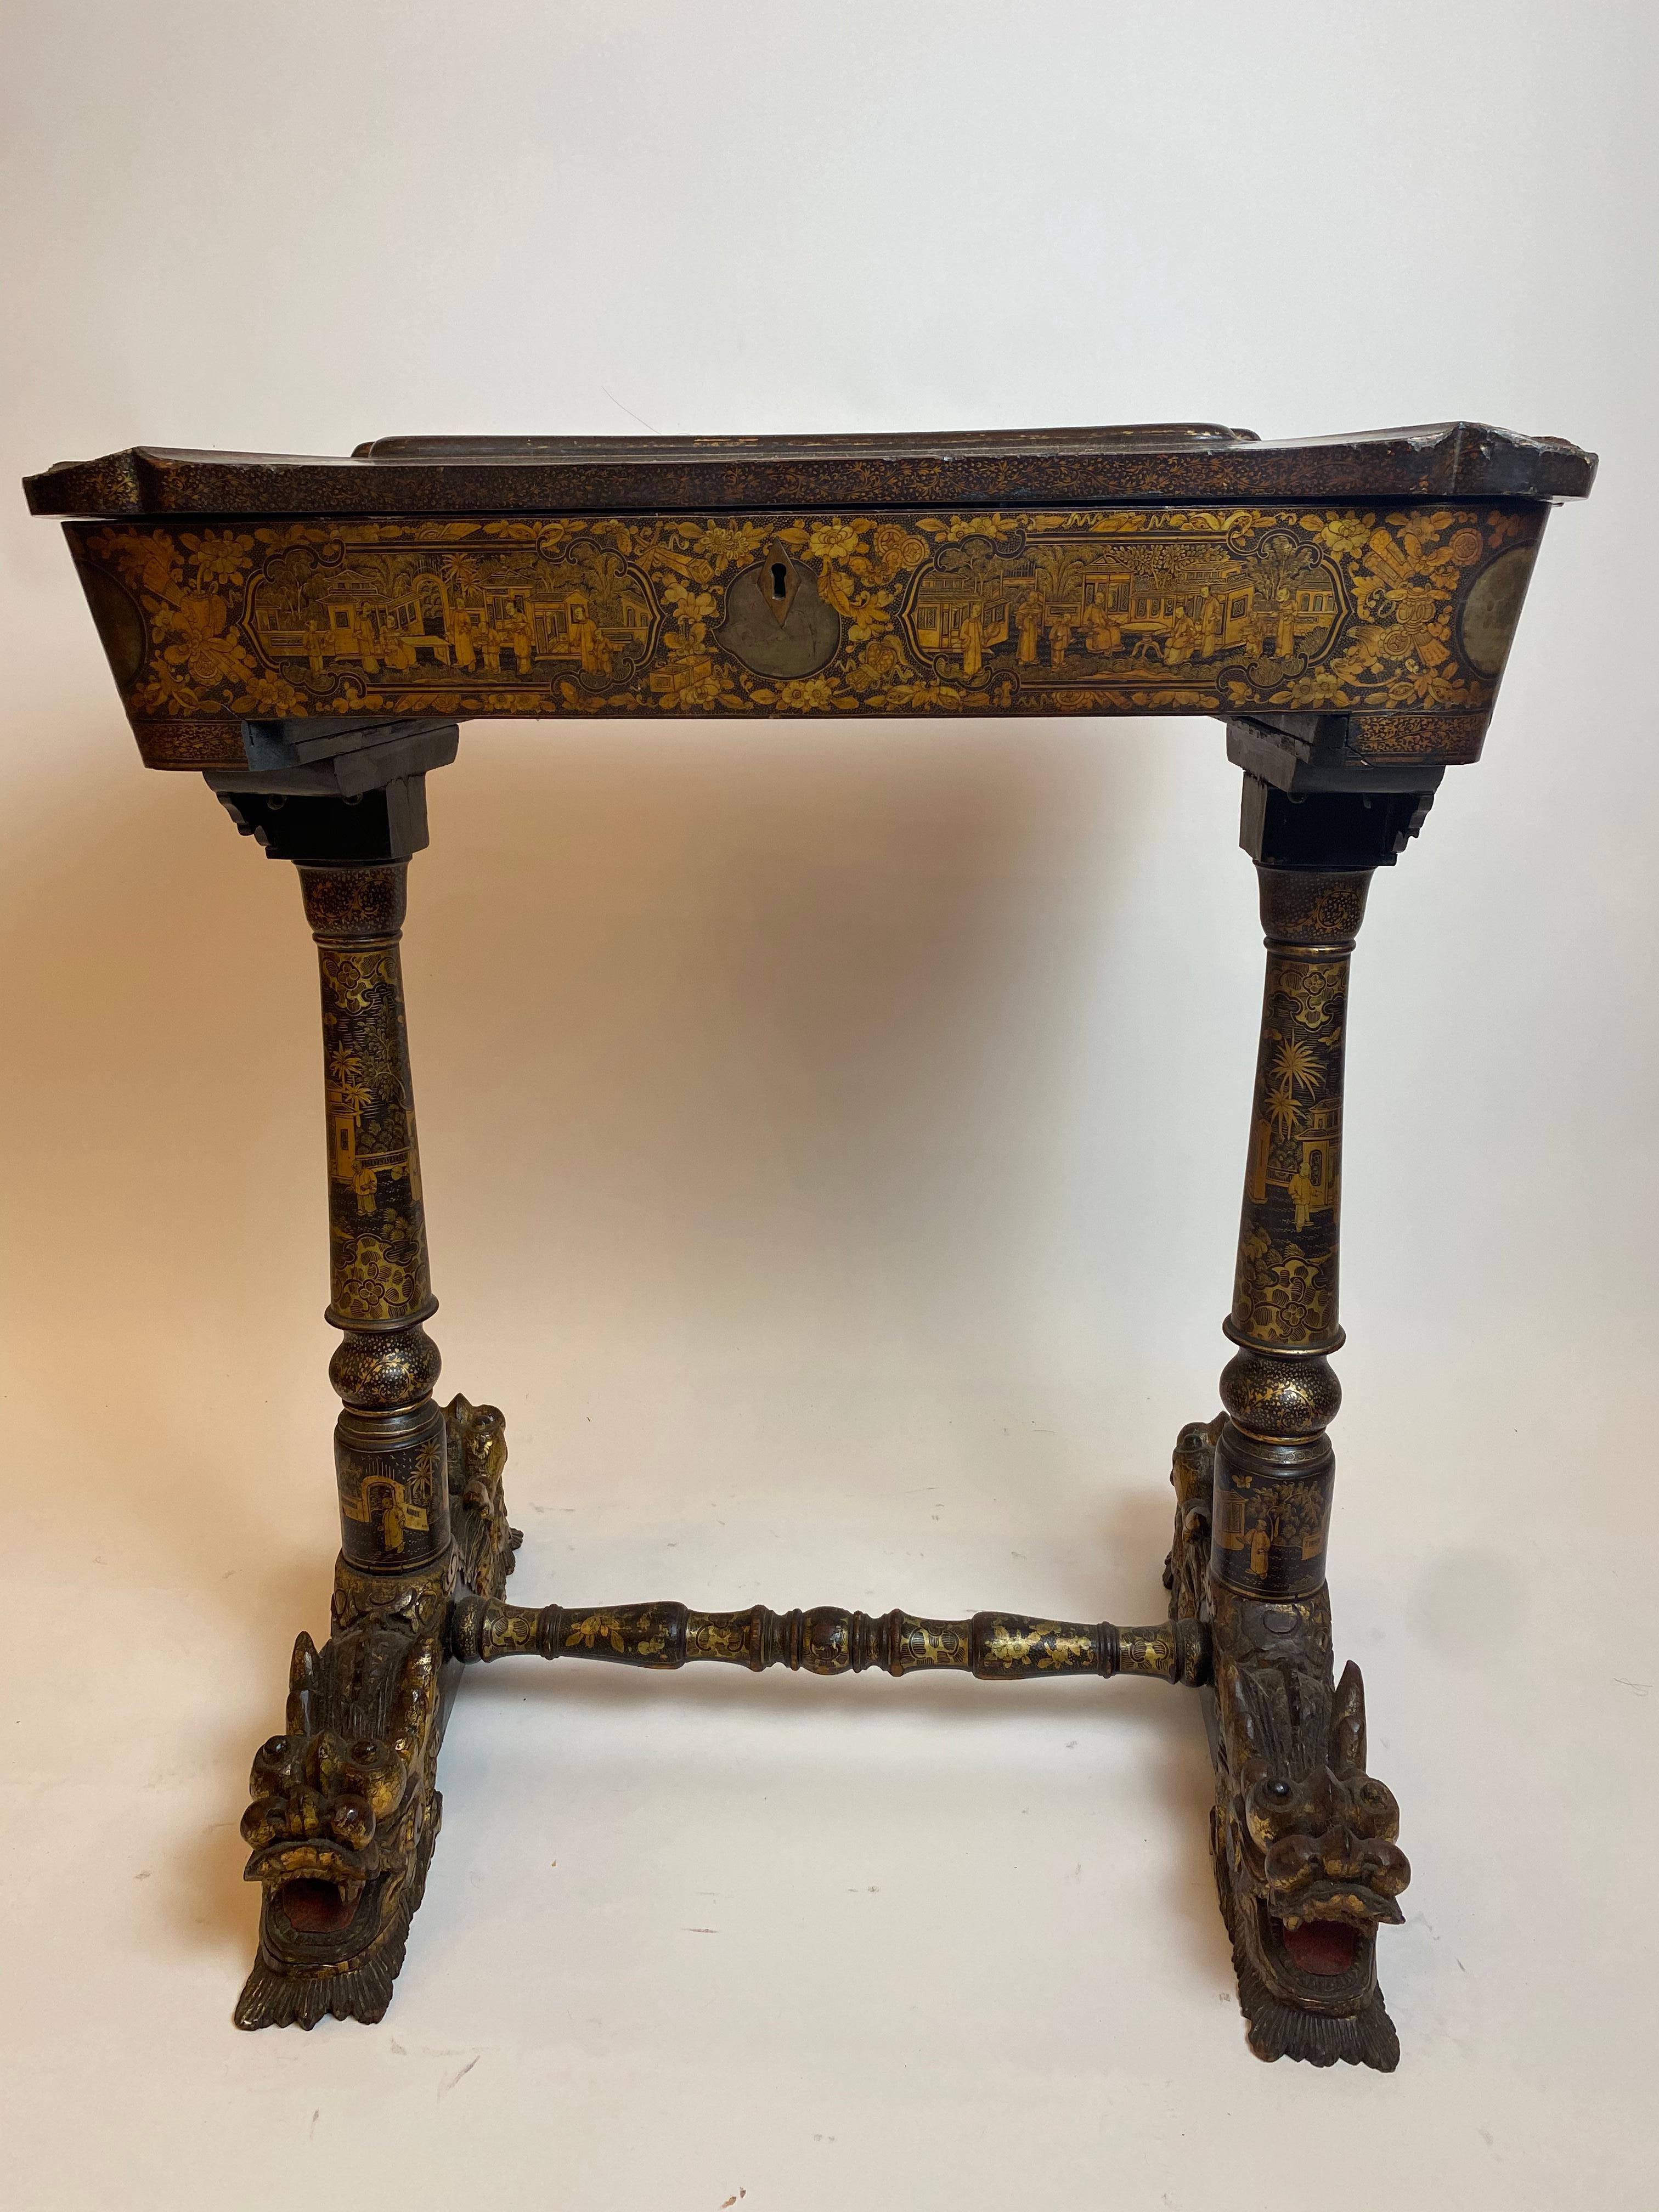 Lacquered Early 19th Century Chinese Export Lacquer and Gilt Work Table For Sale